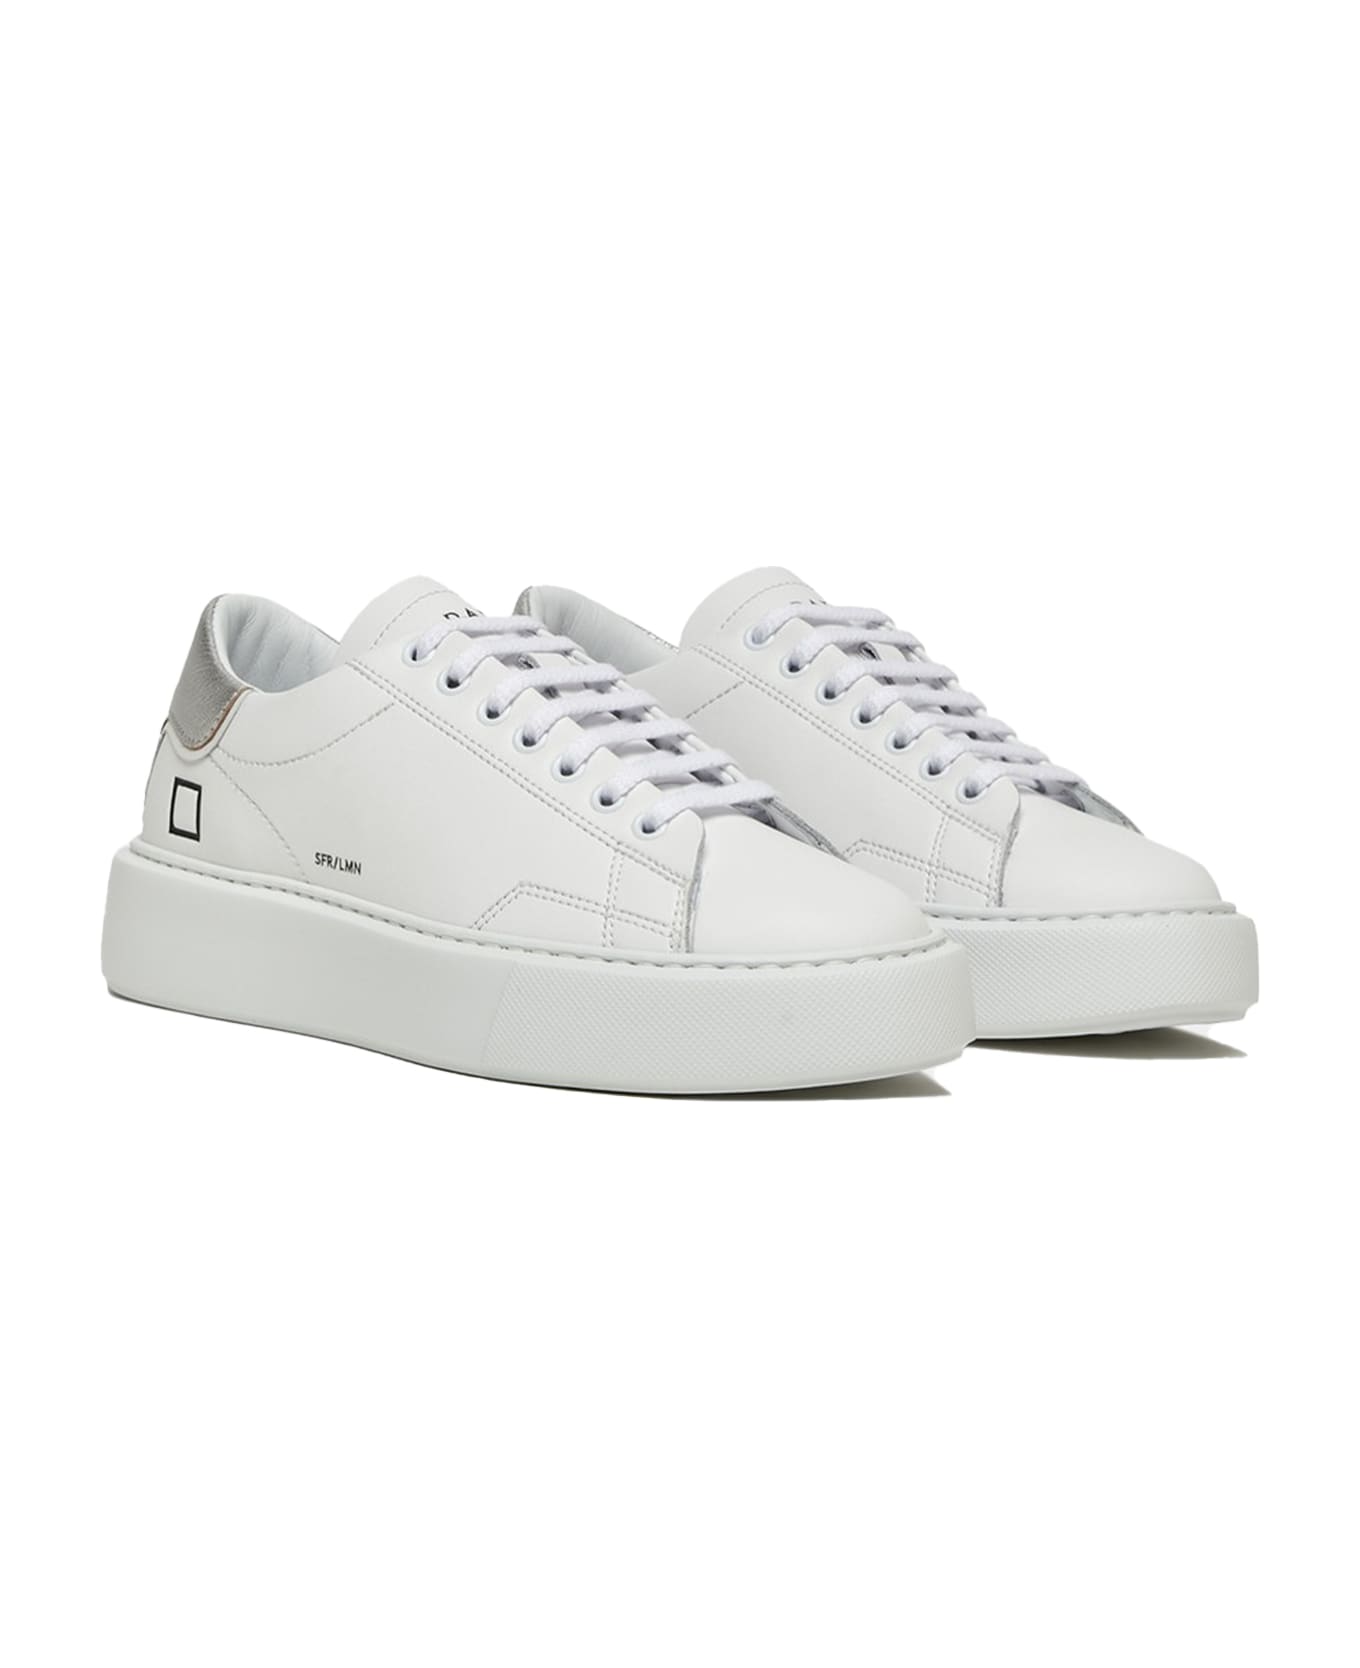 D.A.T.E. Sfera Women's Sneaker In Leather And Silver Heel スニーカー